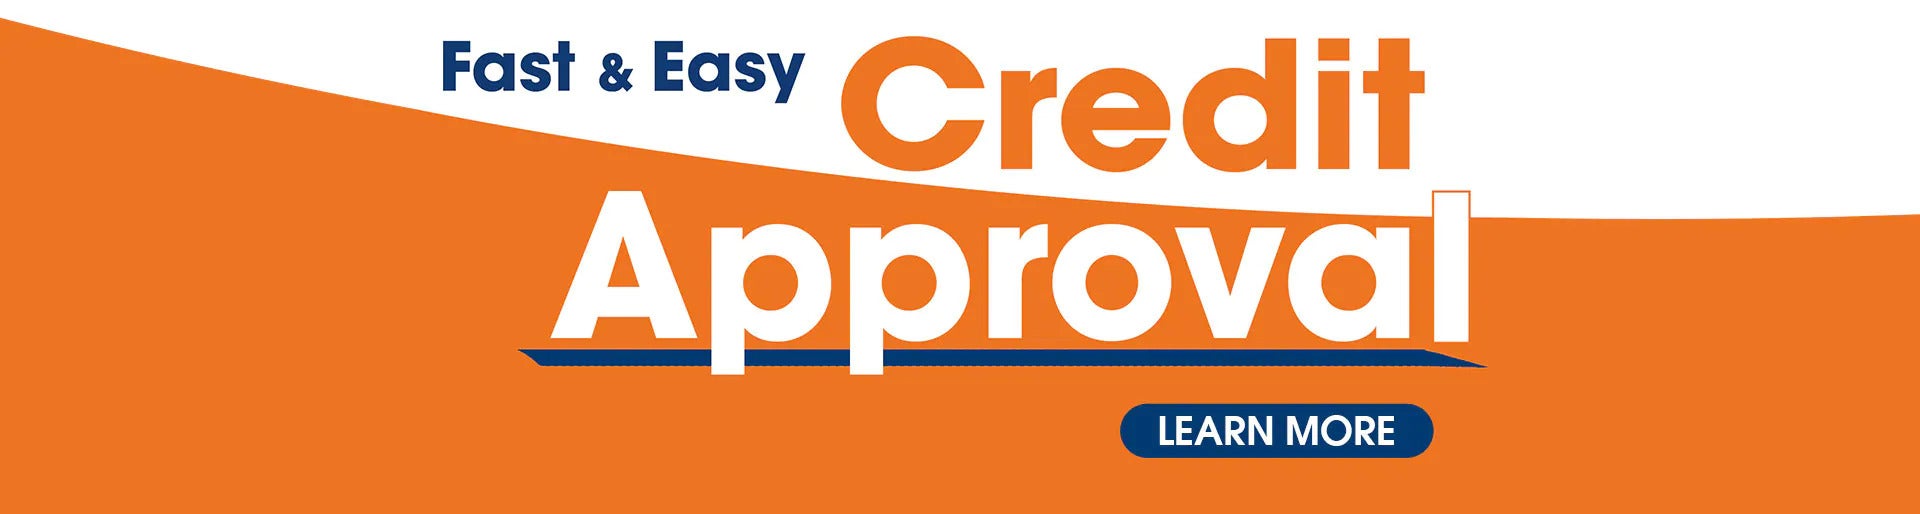 Fast and Easy Credit Approval